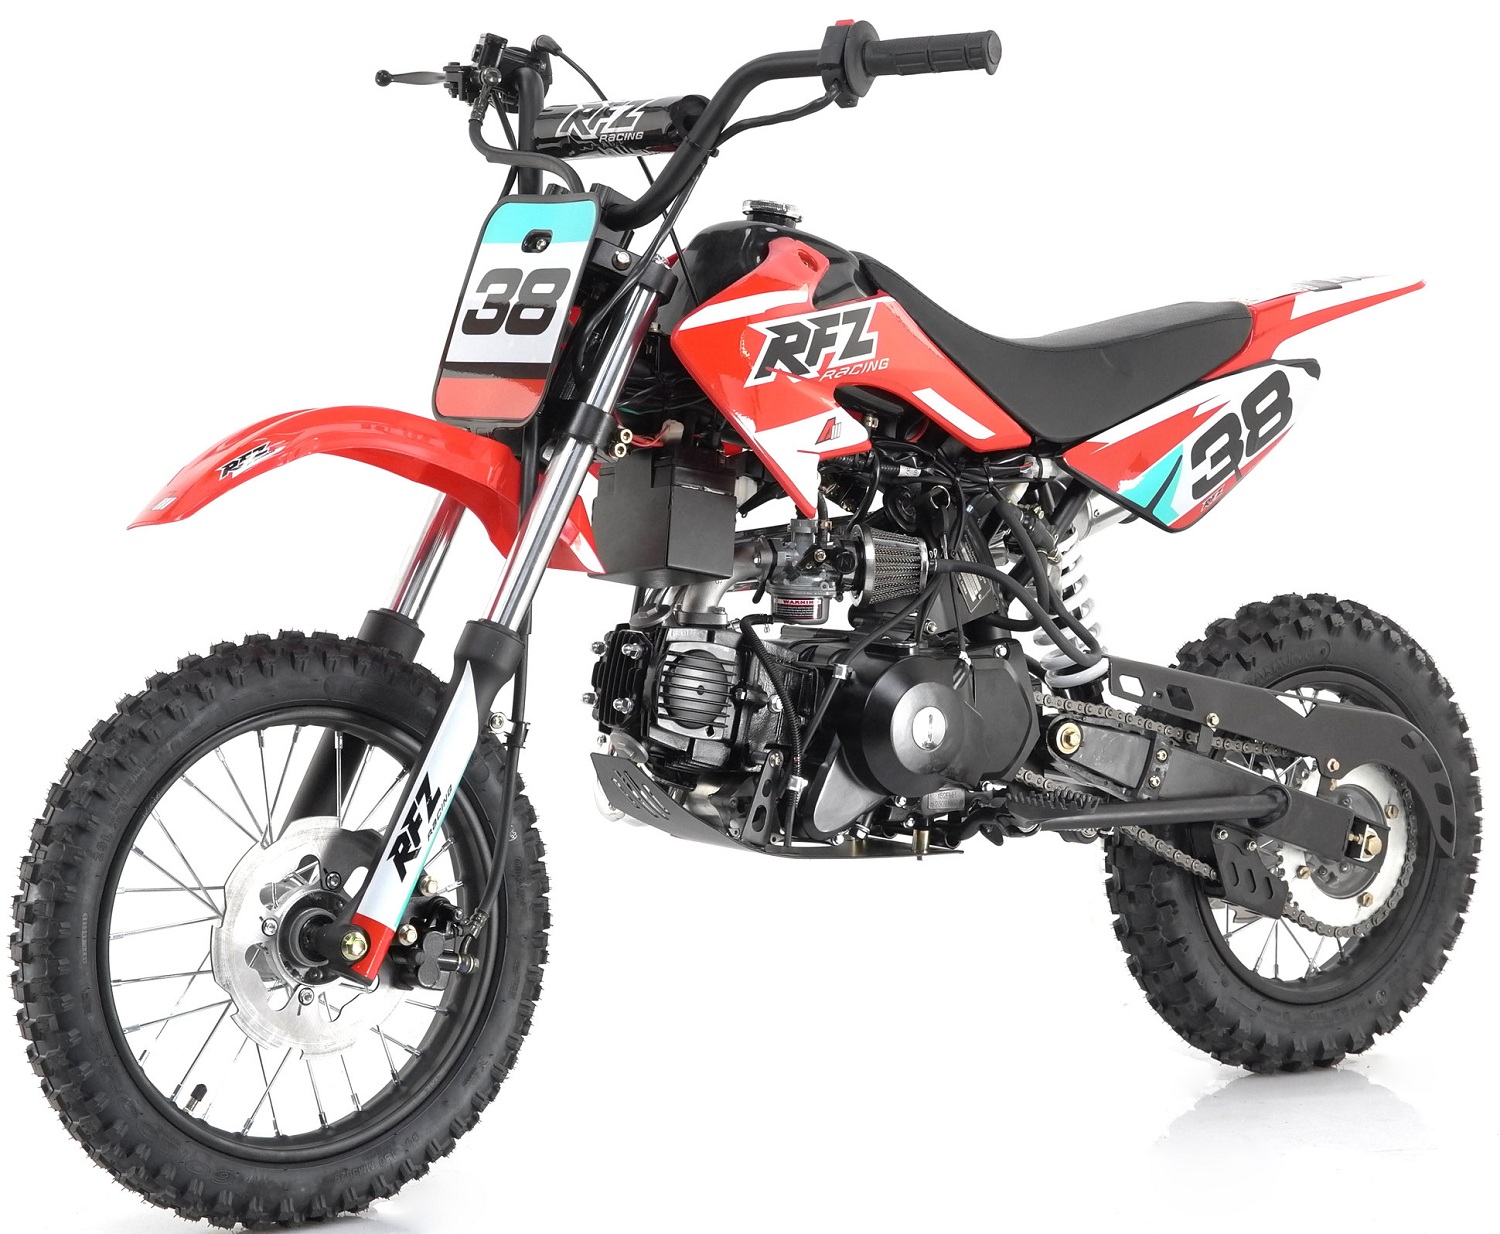 Apollo DB-38 110cc Dirt Bike, Fully Automatic, Electric Start, Air-Cooled